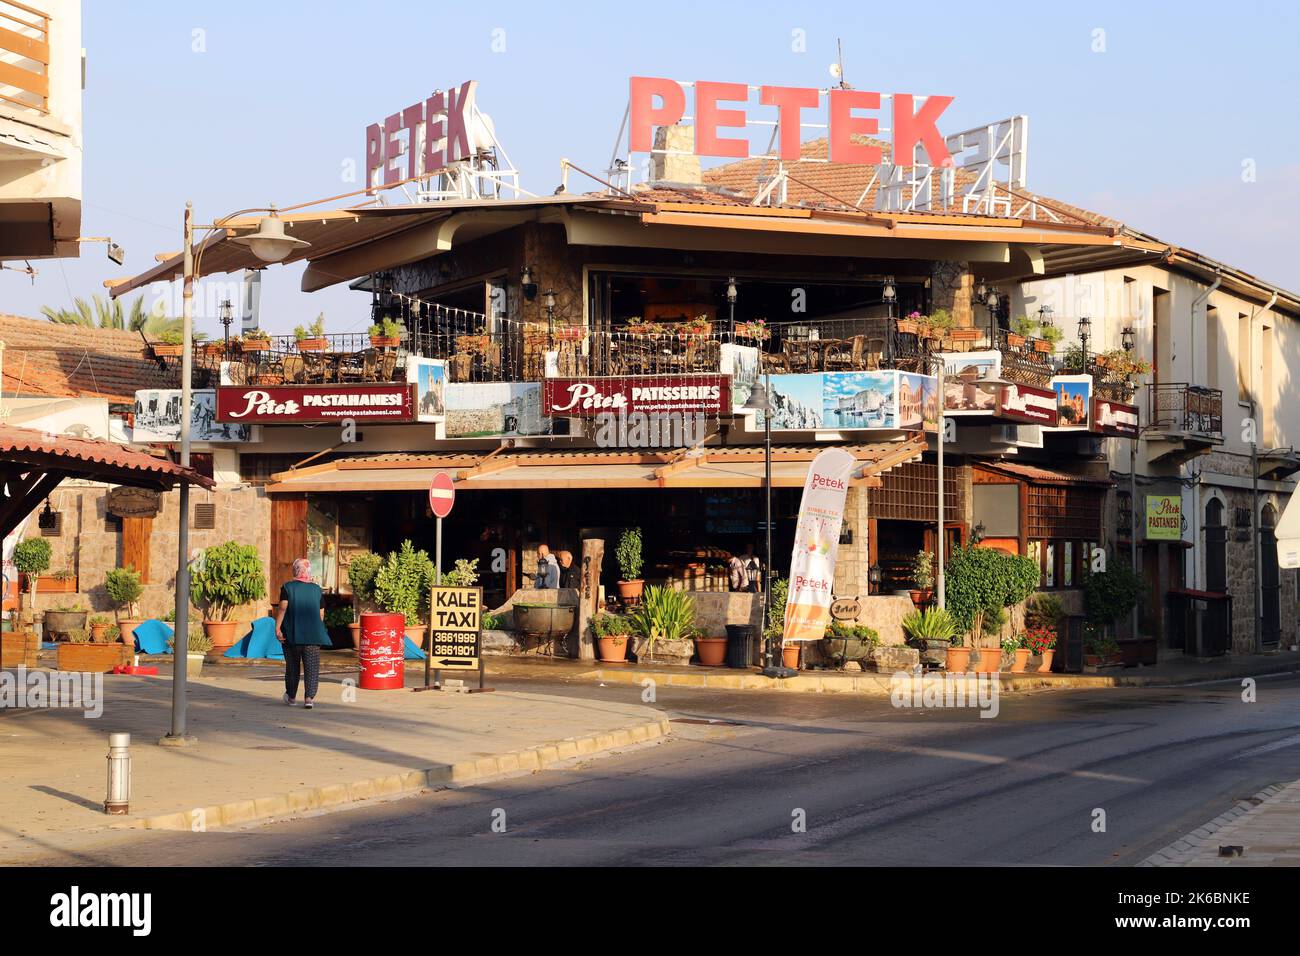 The famous Petek's patisserie and restaurant in Famagusta Old Town Stock Photo